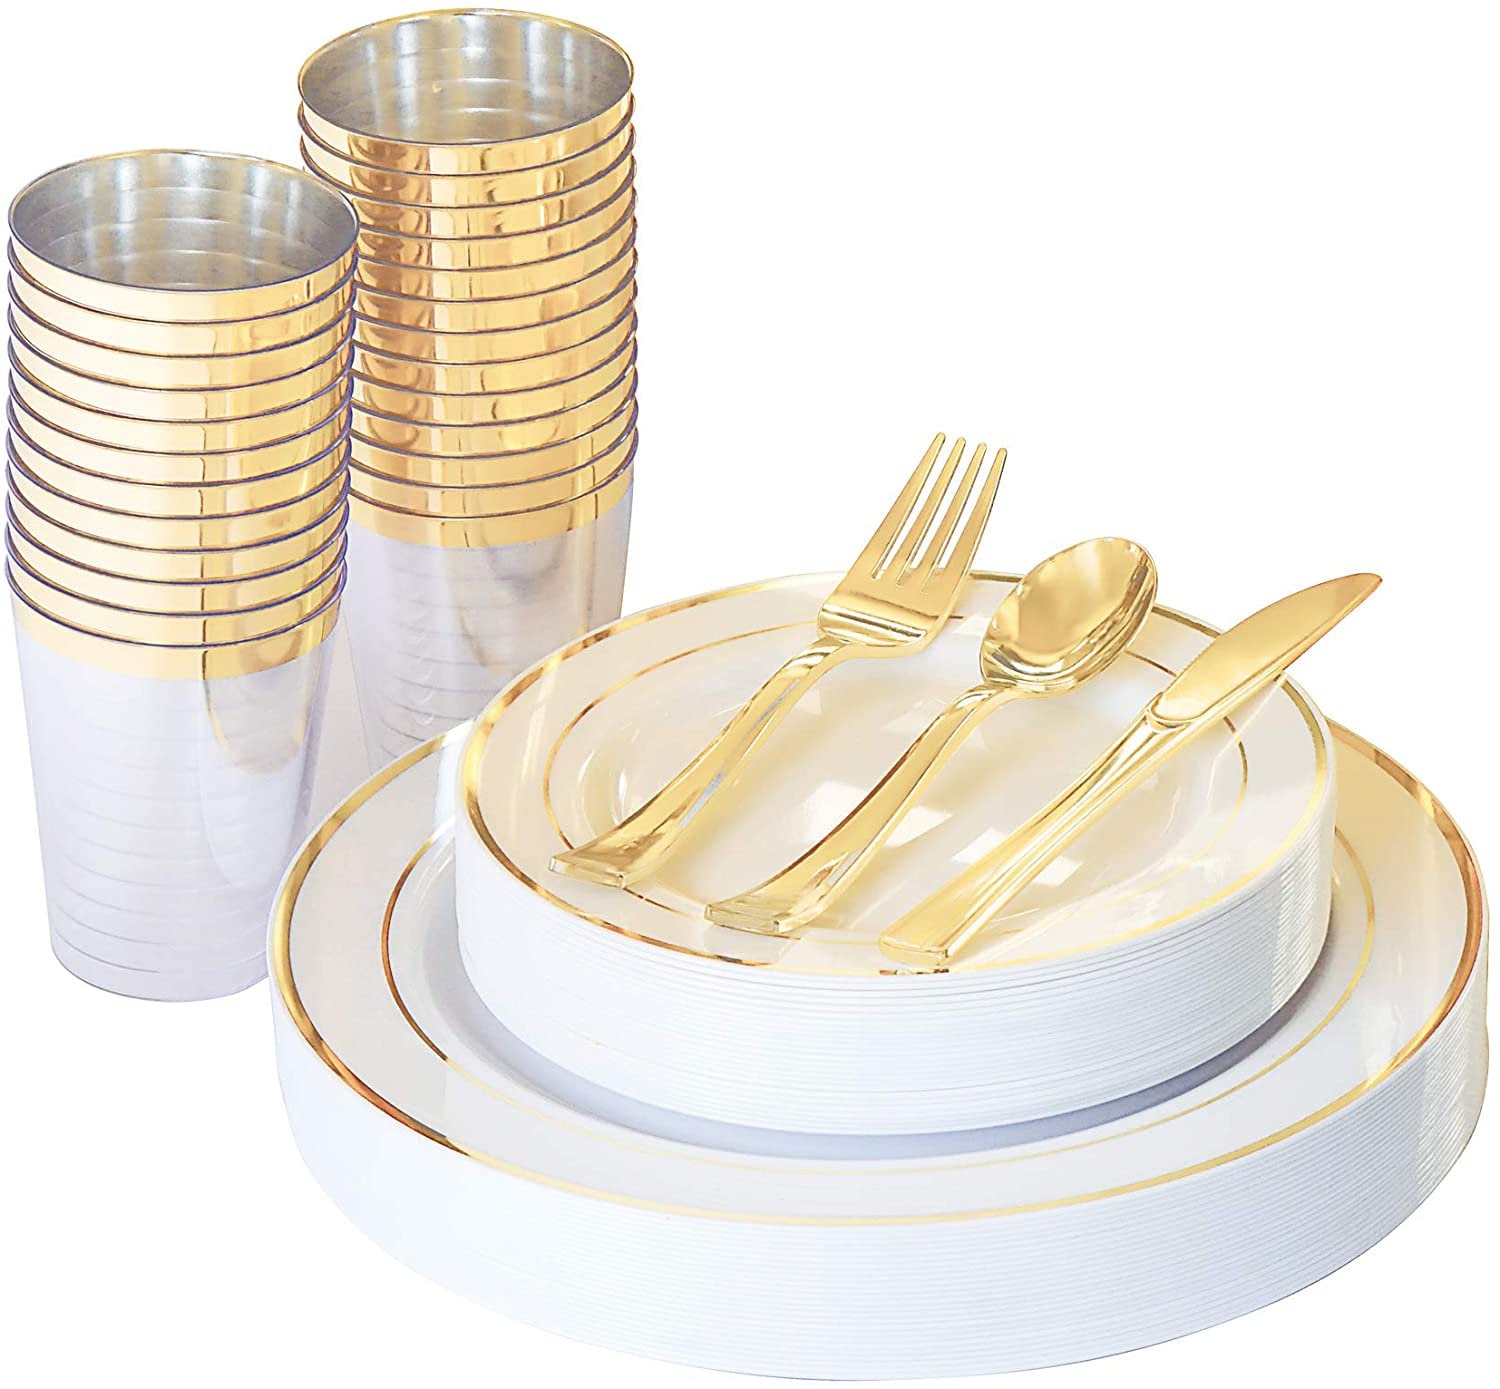 25 Spoons& 10oz Plastic Cups 25 Knives Gold Glitter Design Include 25 Dinner Plates,25 Salad Plates,25 Forks WDF 150pcs Gold Plastic Plates with Disposable Plastic Silverware&Gold Cups 